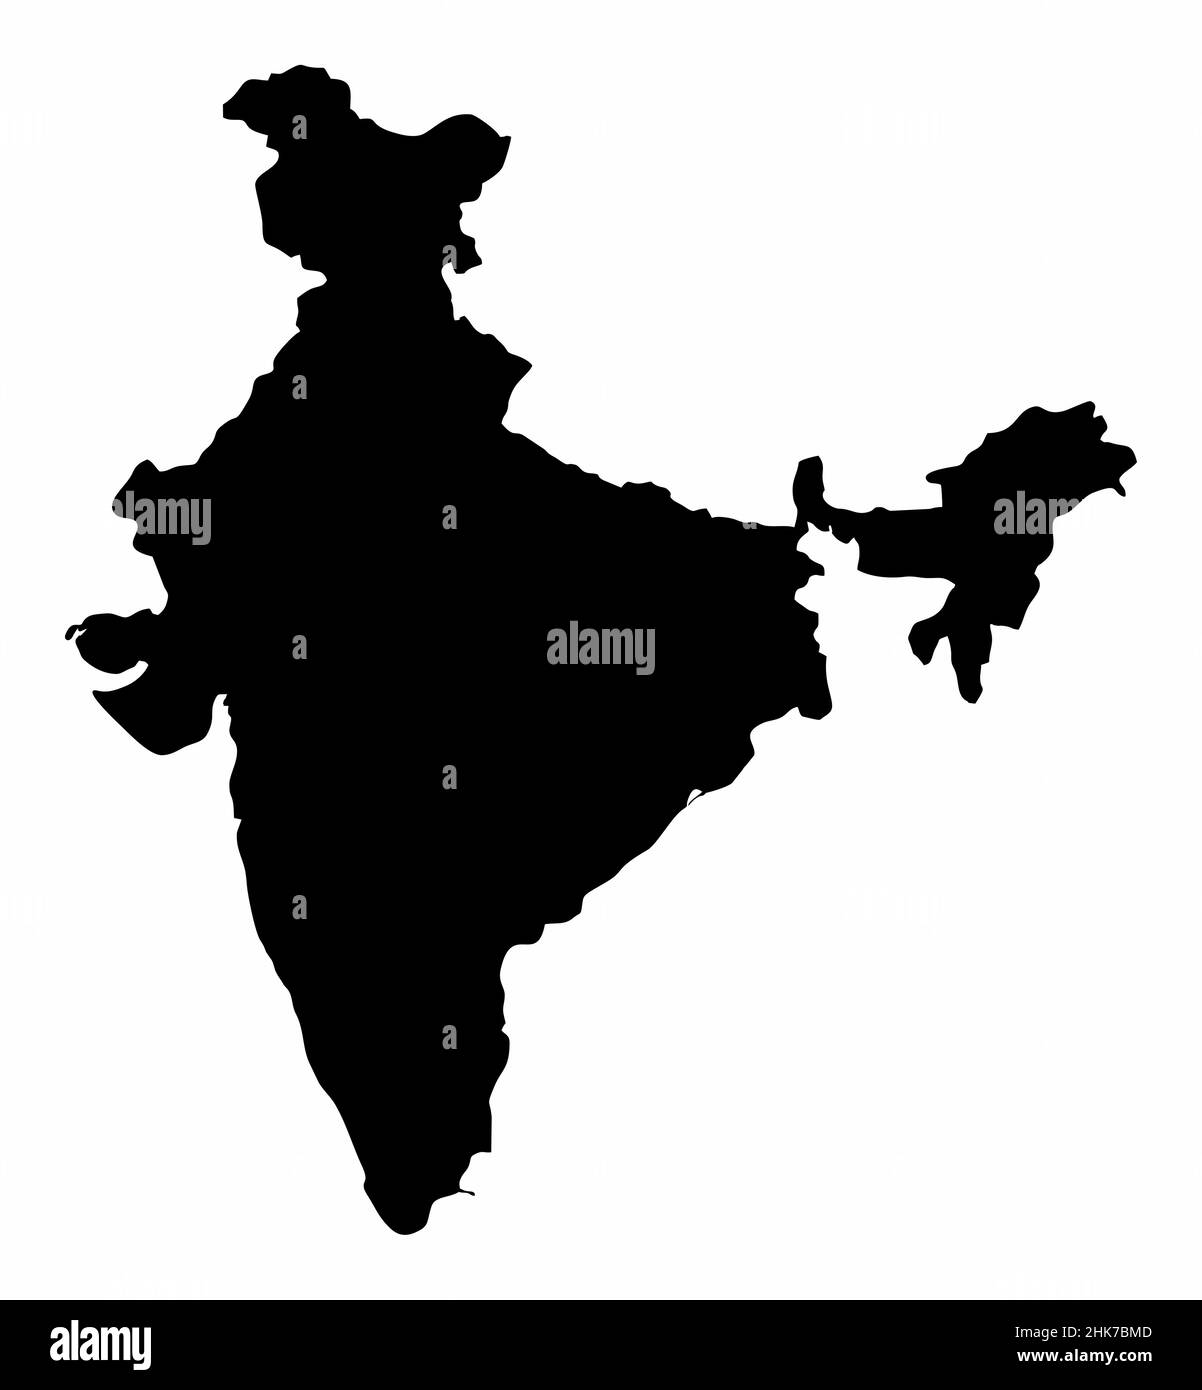 India silhouette map isolated on white background Stock Vector